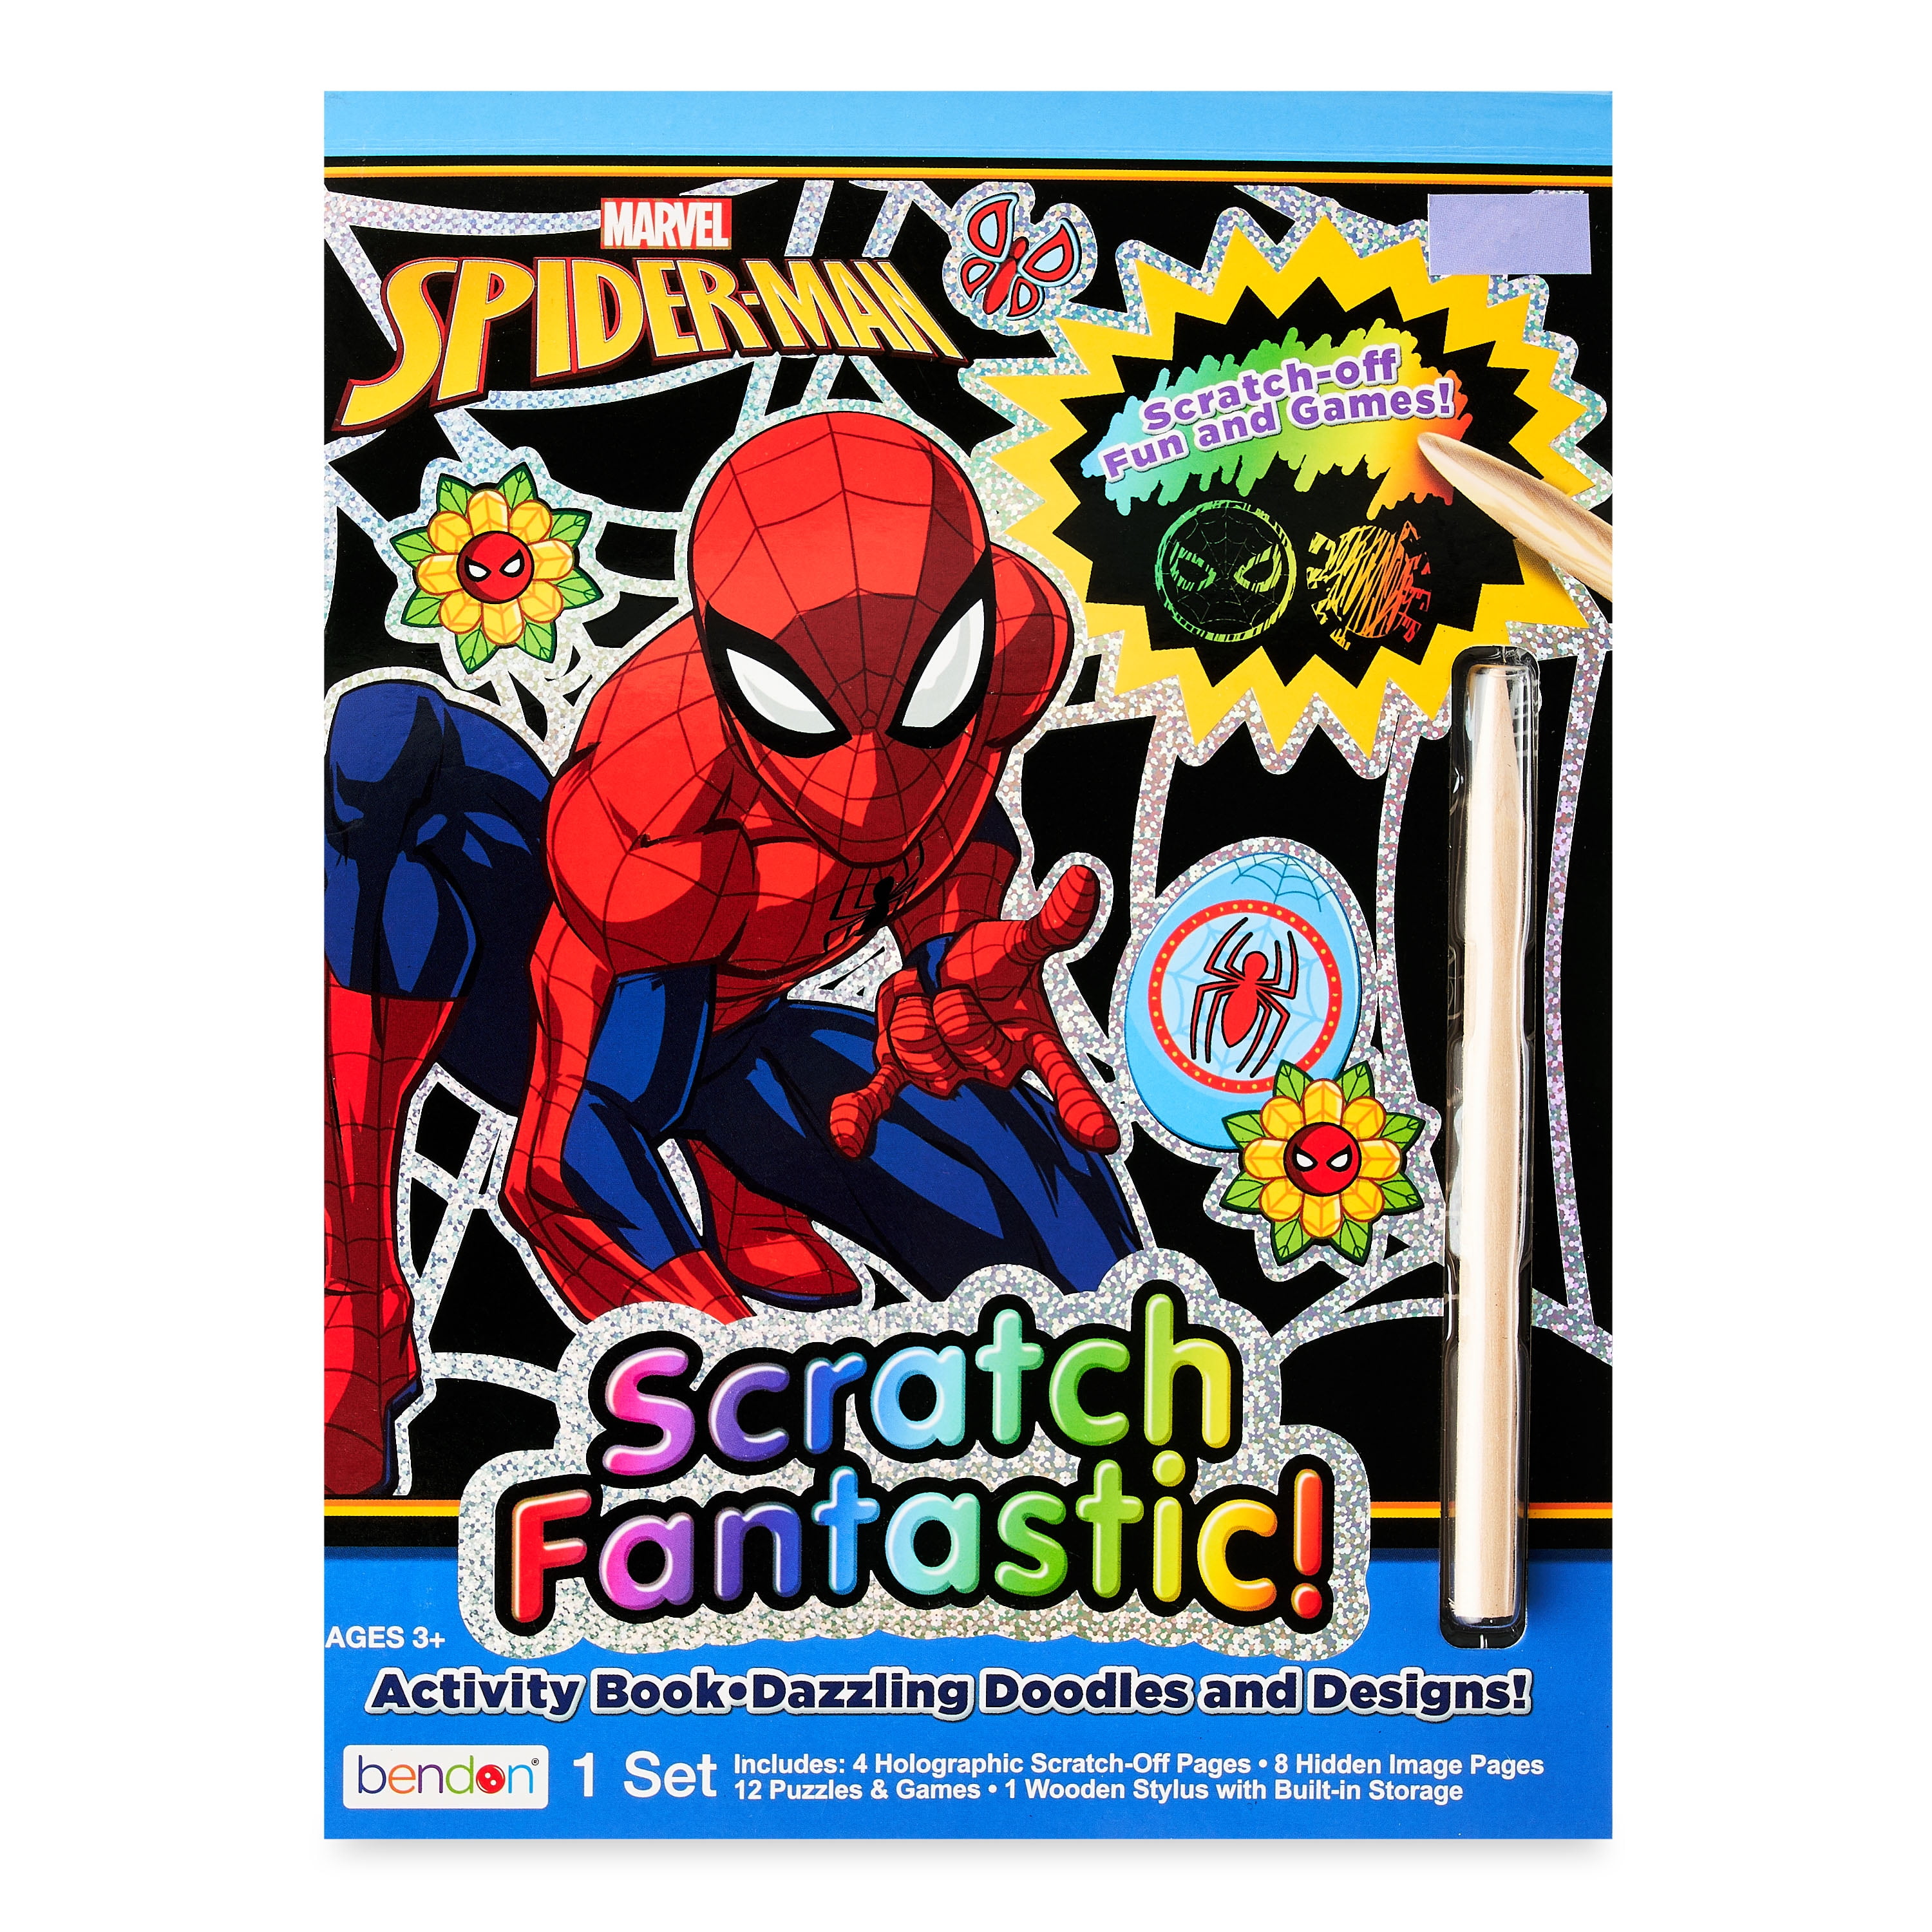 Marvel Spiderman Scratch Fantastic Reveal Book, Easter Party Favor Gifts